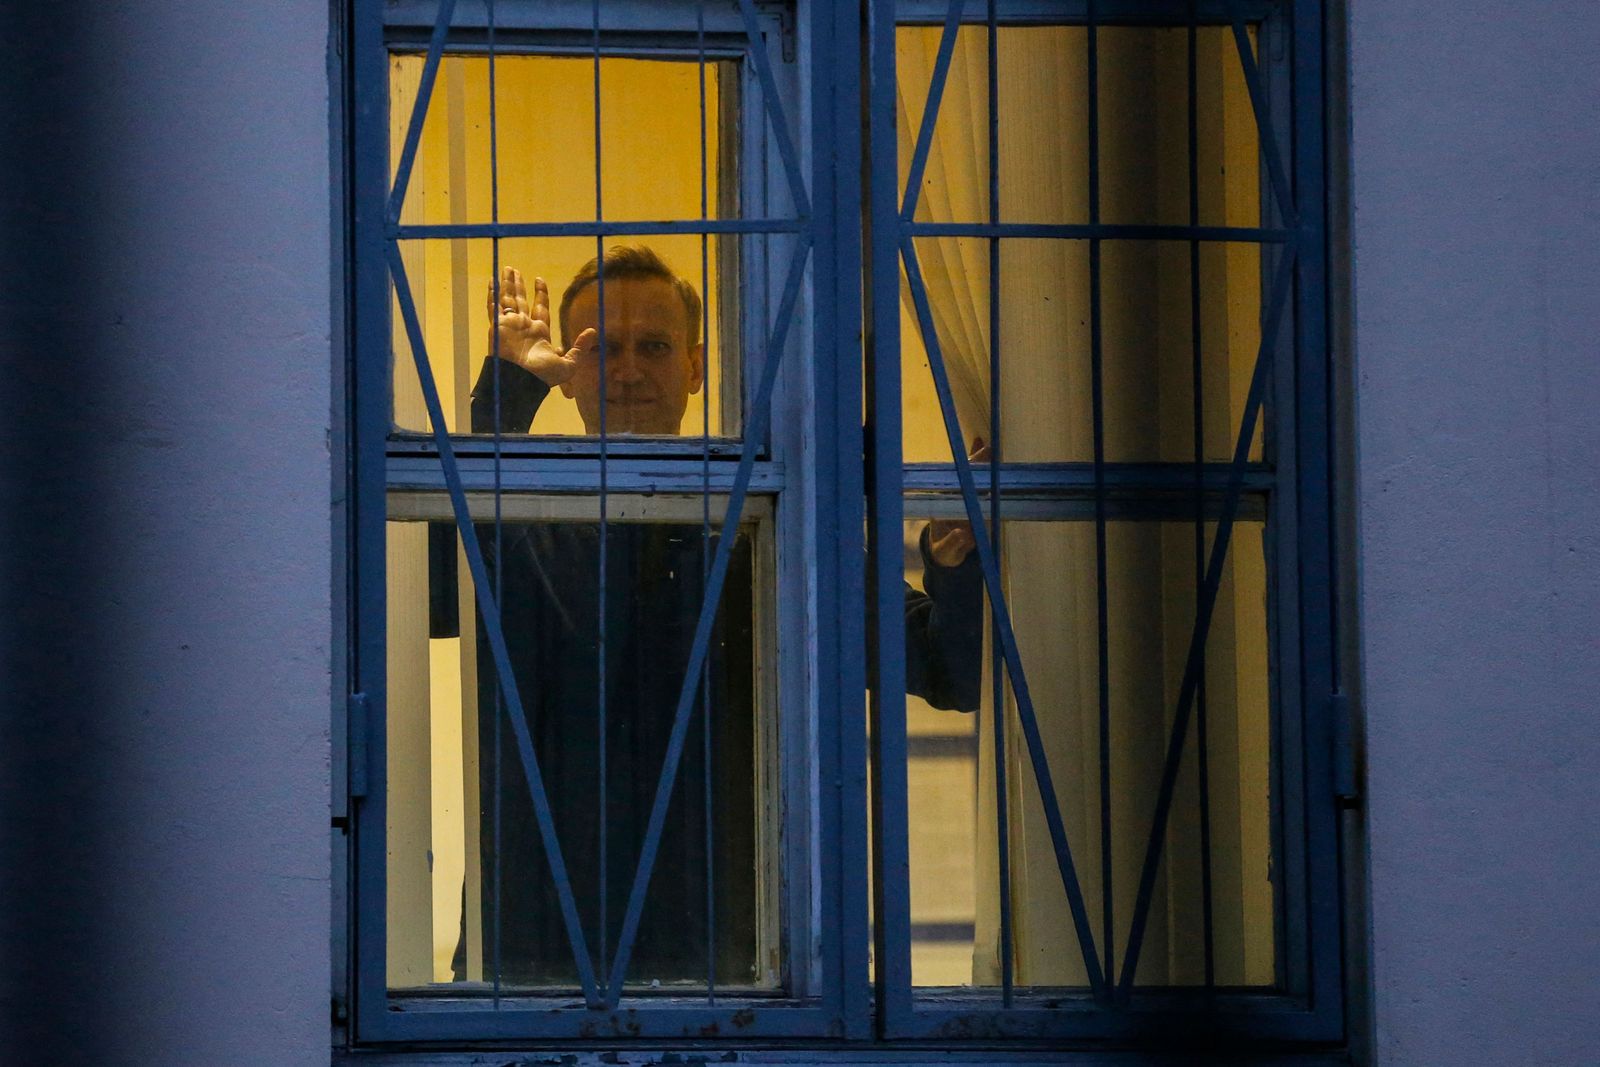 (FILES) Russian opposition leader Alexei Navalny waves from behind the window of a police station in Moscow on September 29, 2017. Russian opposition leader Alexei Navalny died on February 16, 2024 at the Arctic prison colony where he was serving a 19-year-term, Russia's federal penitentiary service said in a statement. (Photo by Maxim ZMEYEV / AFP)